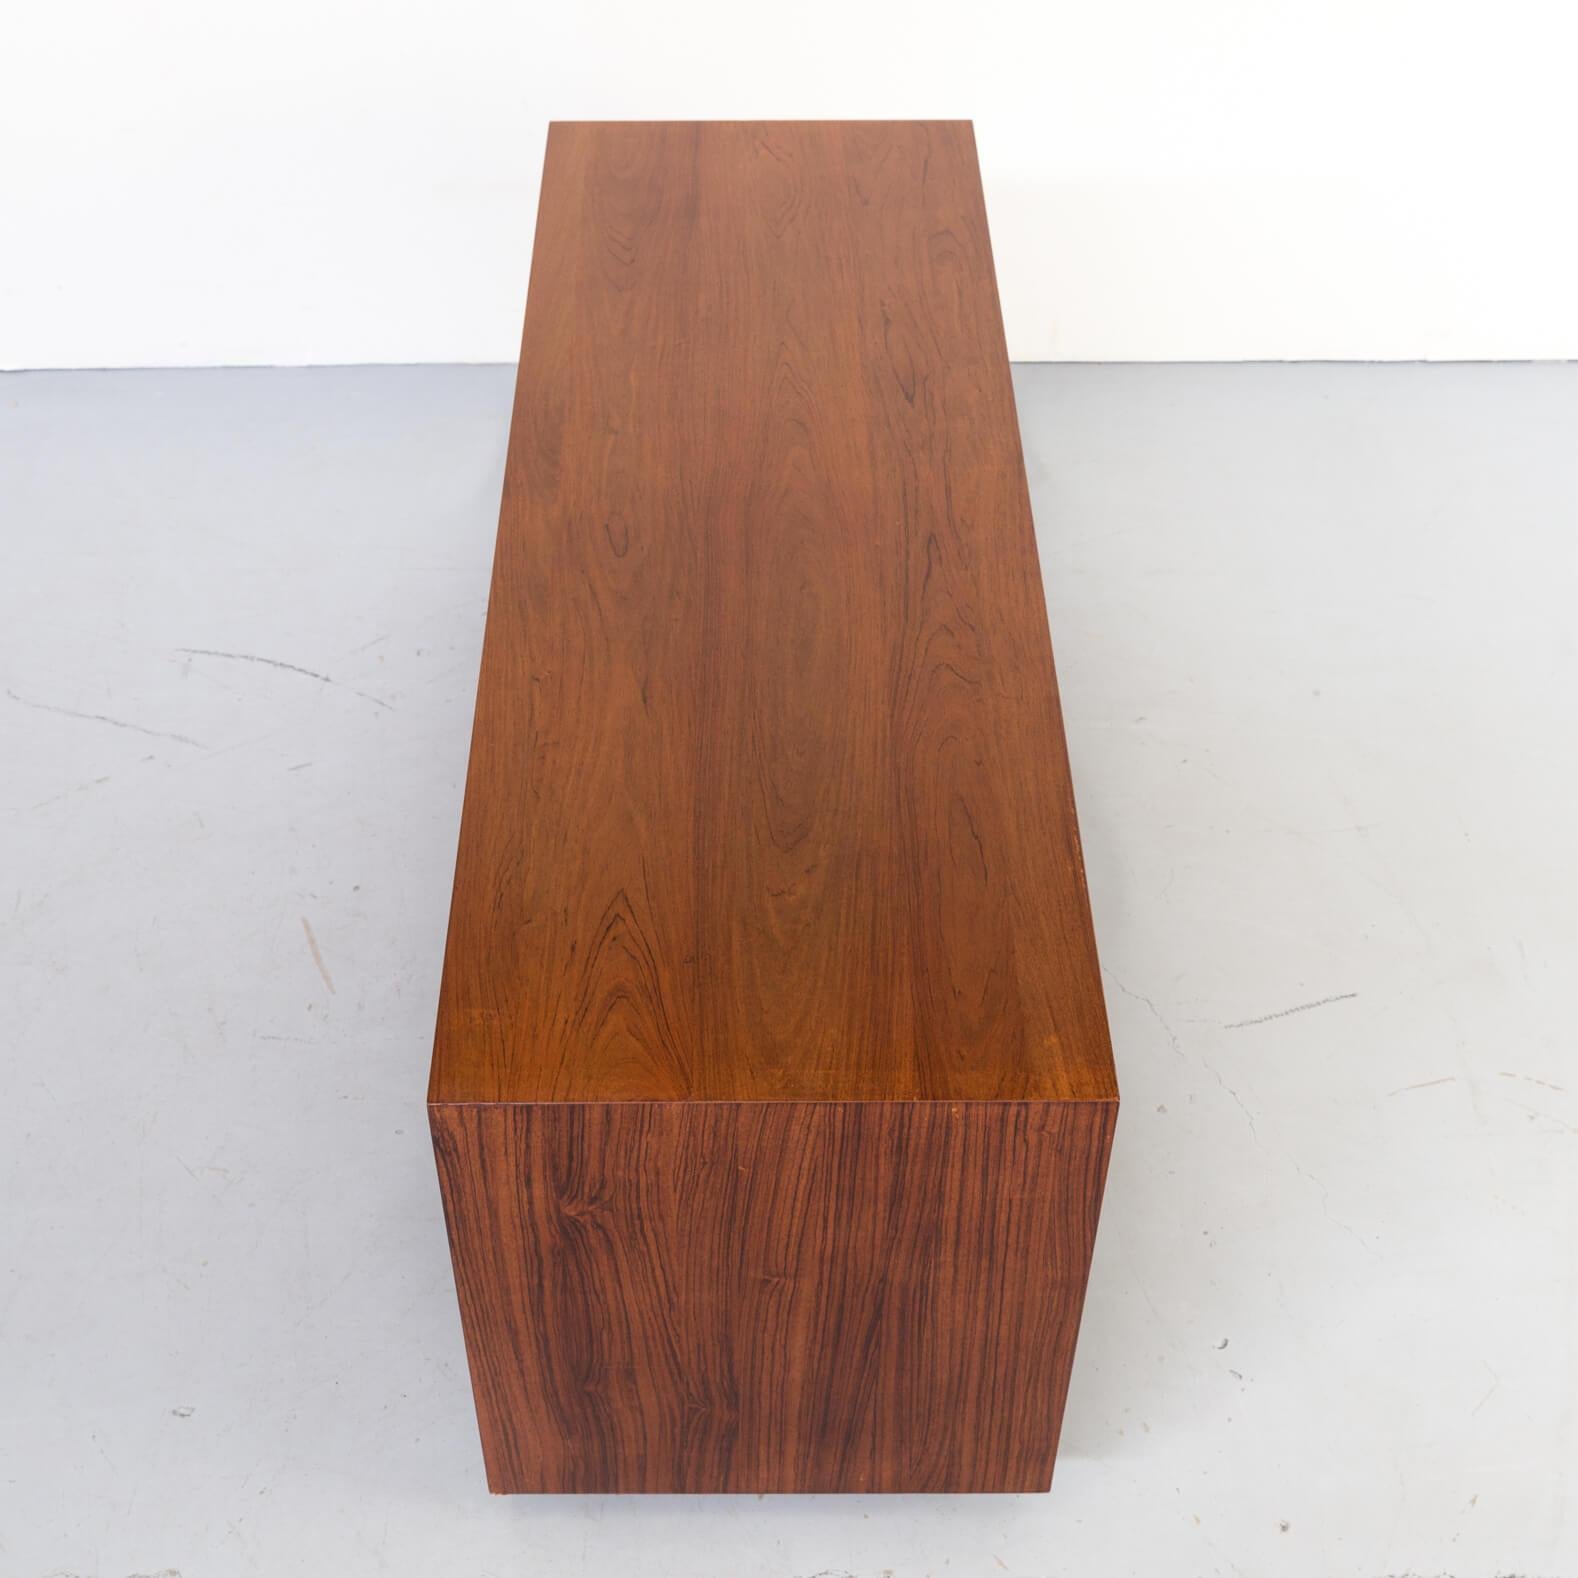 1960s Finn Juhl Rosewood Side, Lowboard from the Diplomat Series for Cado For Sale 2